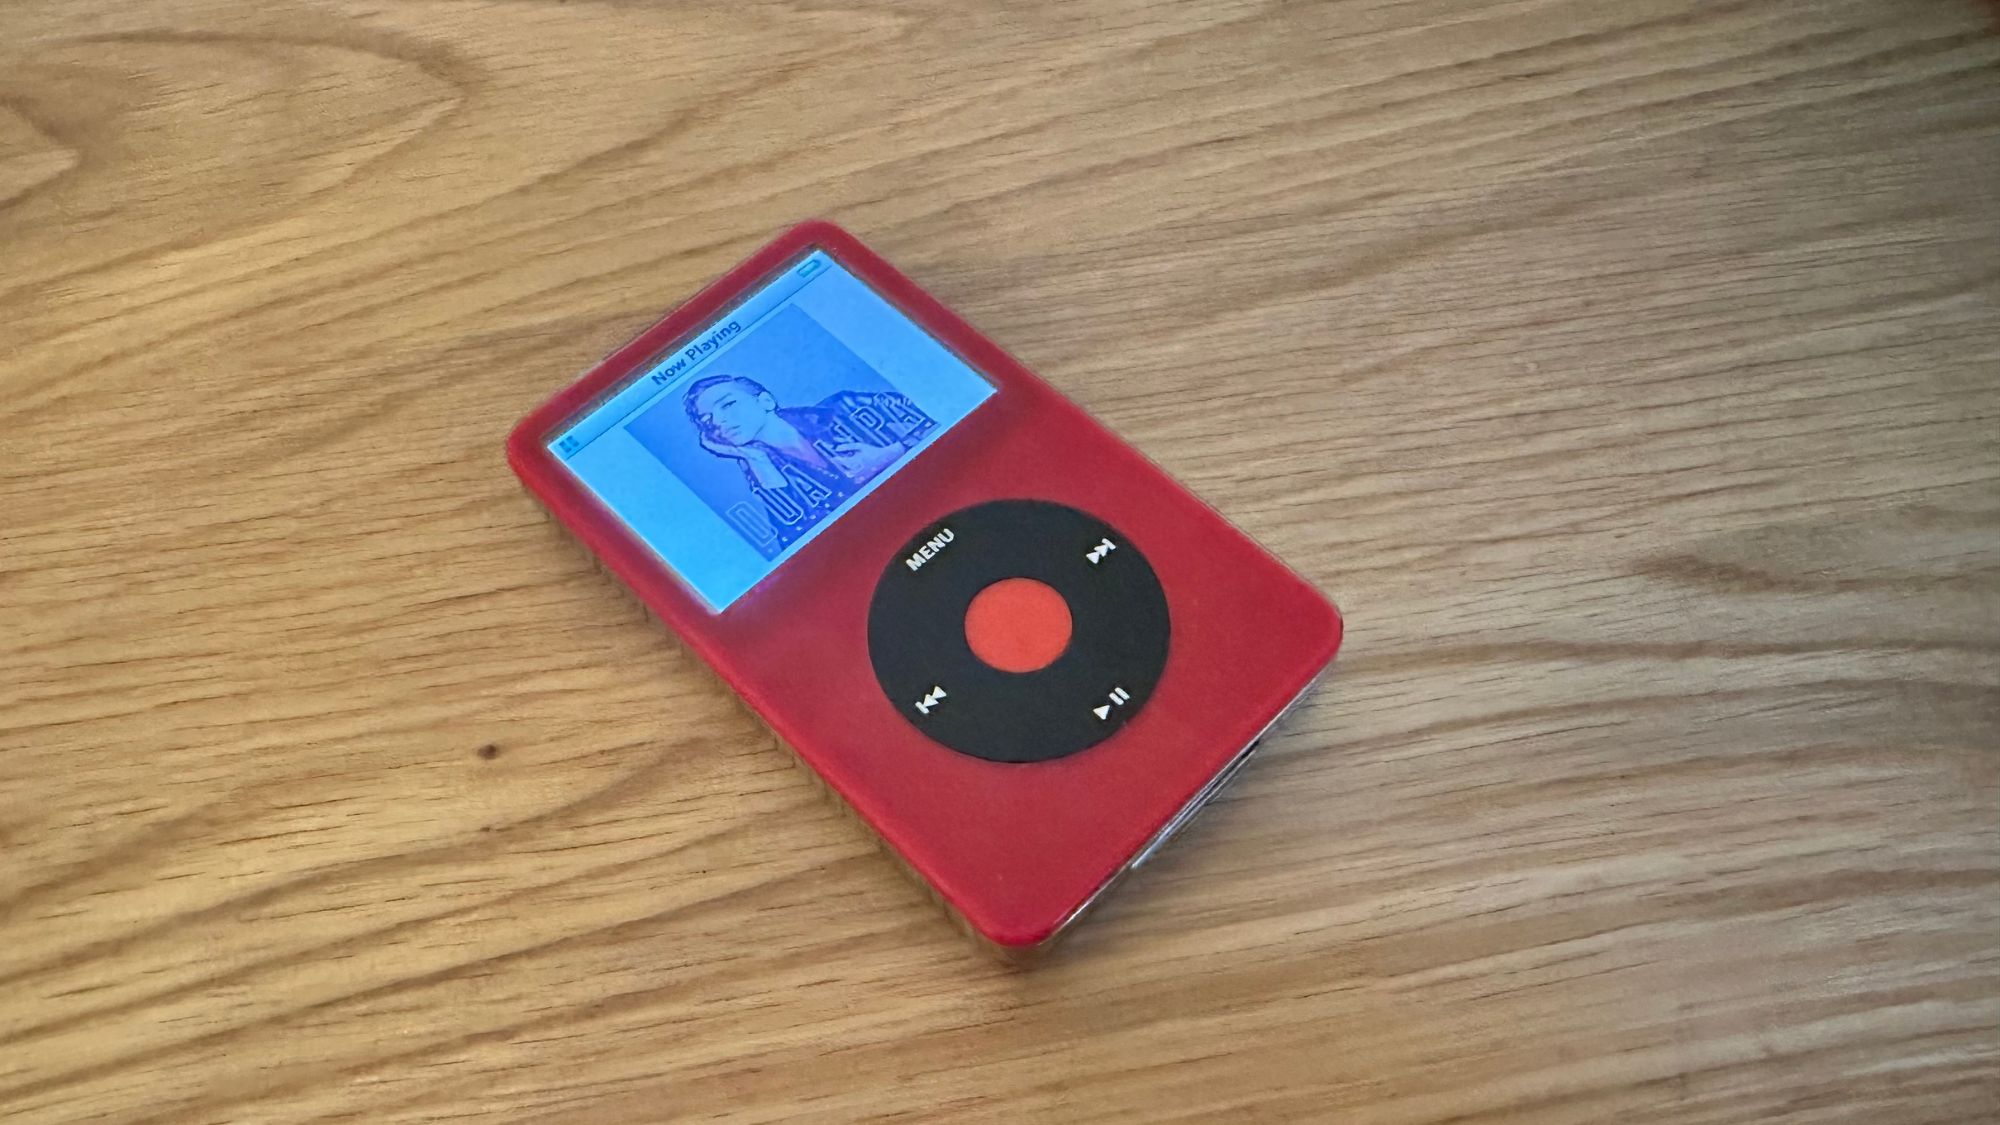 iPod Video on a wooden surface